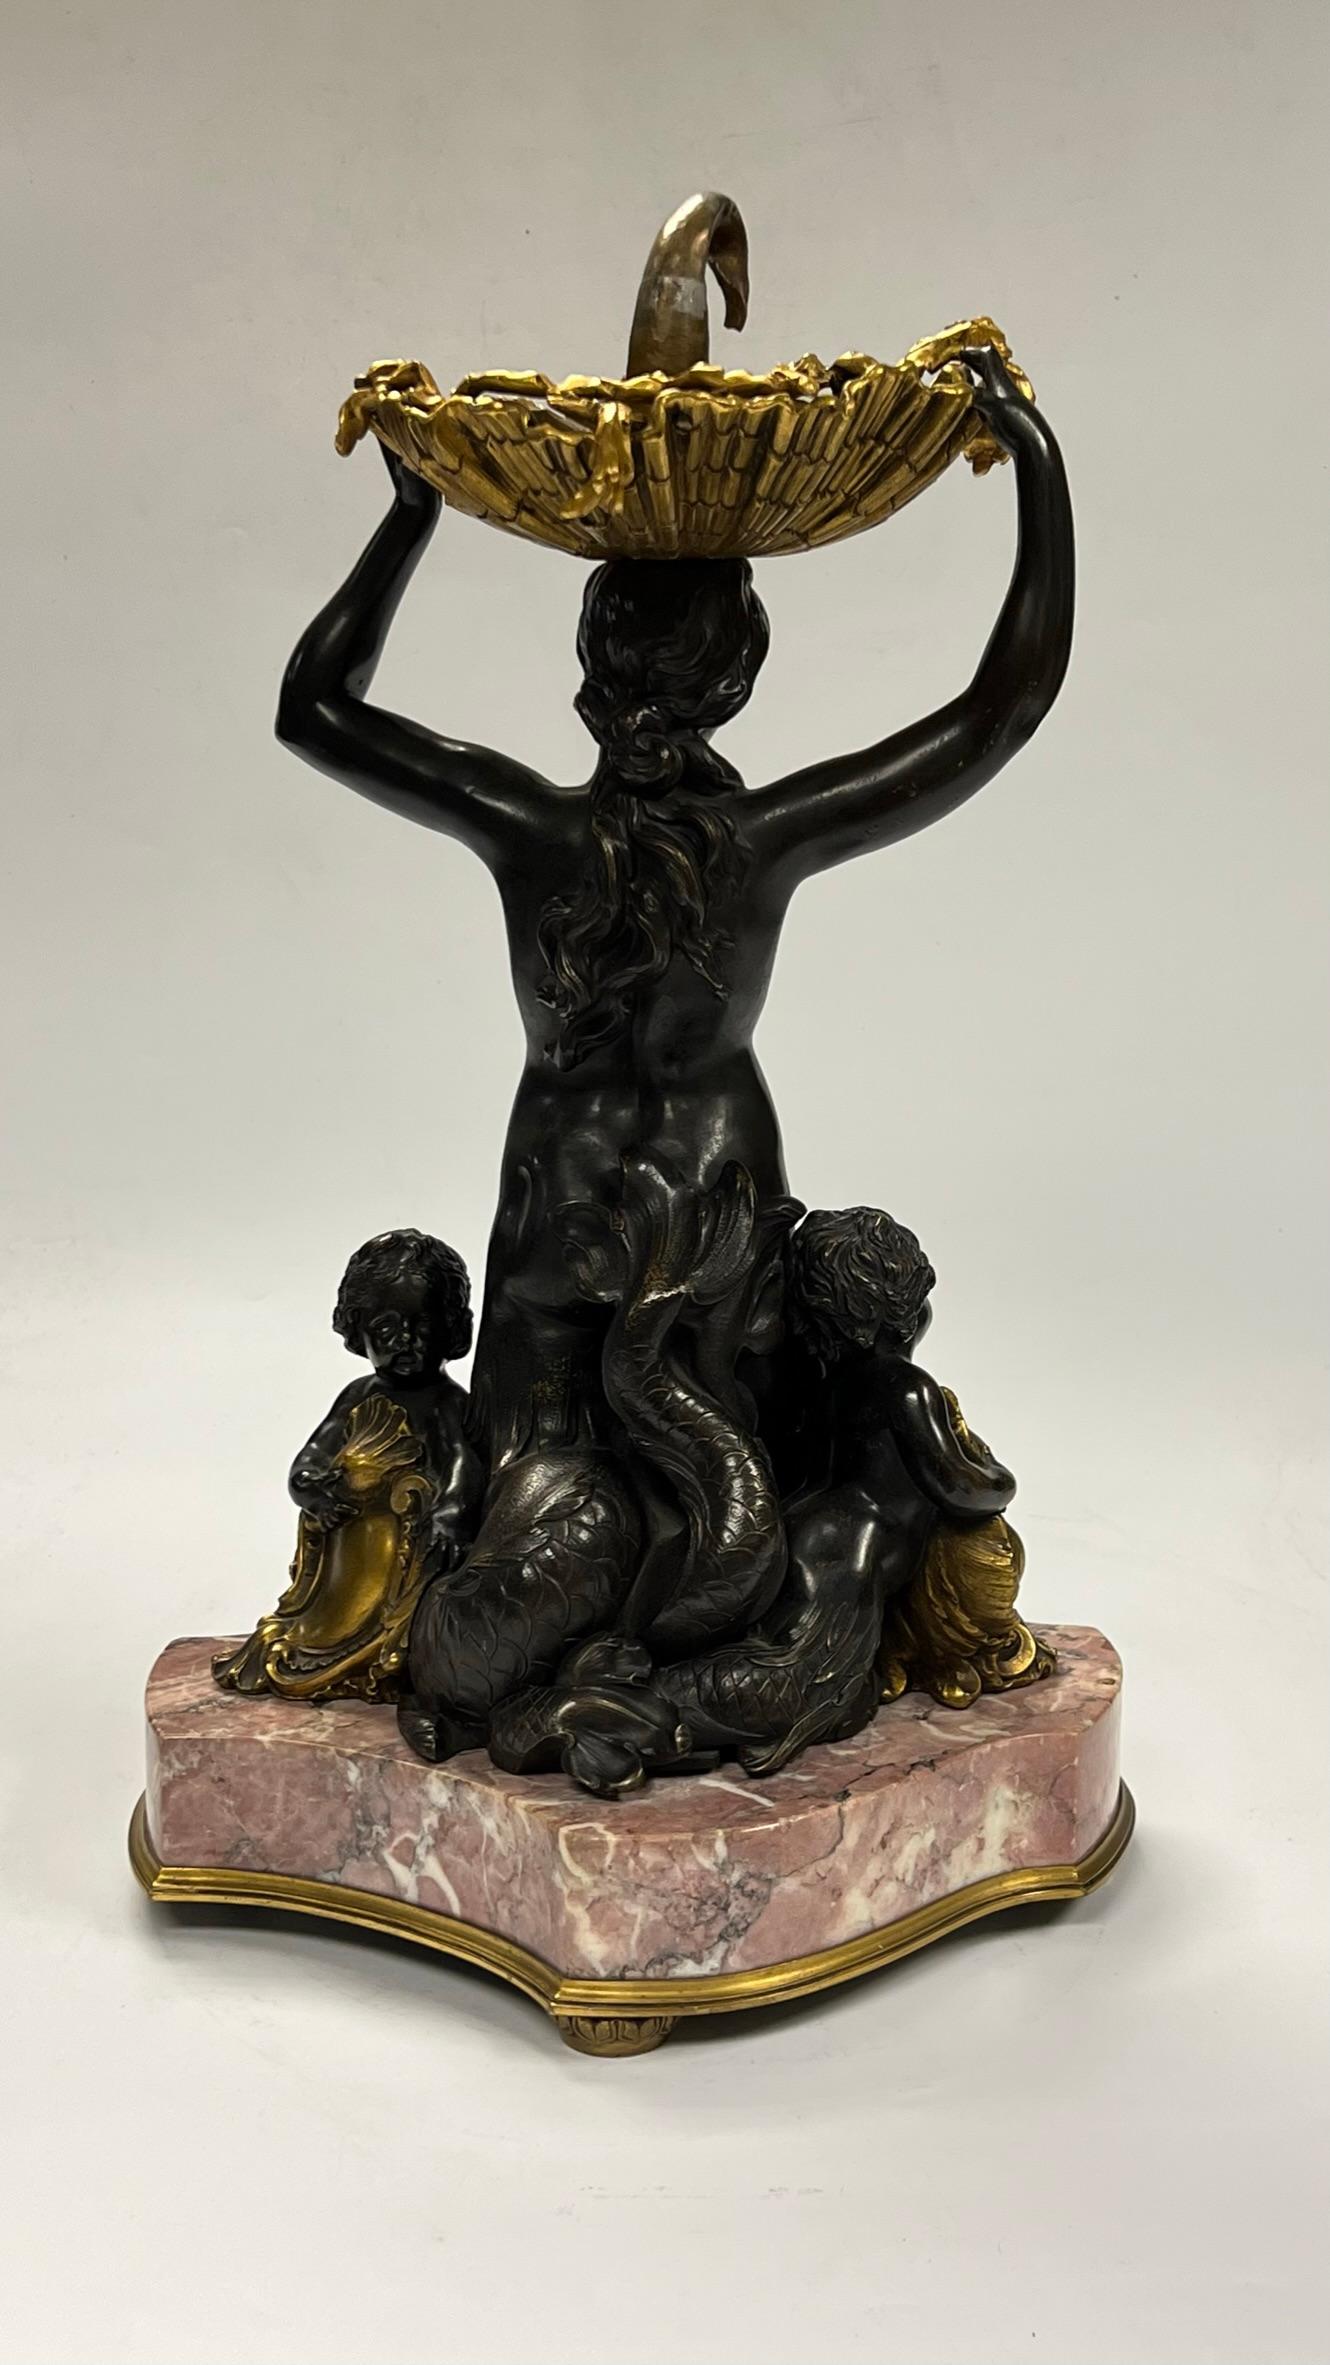 Antique Gilt Bronze and Marble Figural Centerpiece Attributed to E.F. Caldwell 1